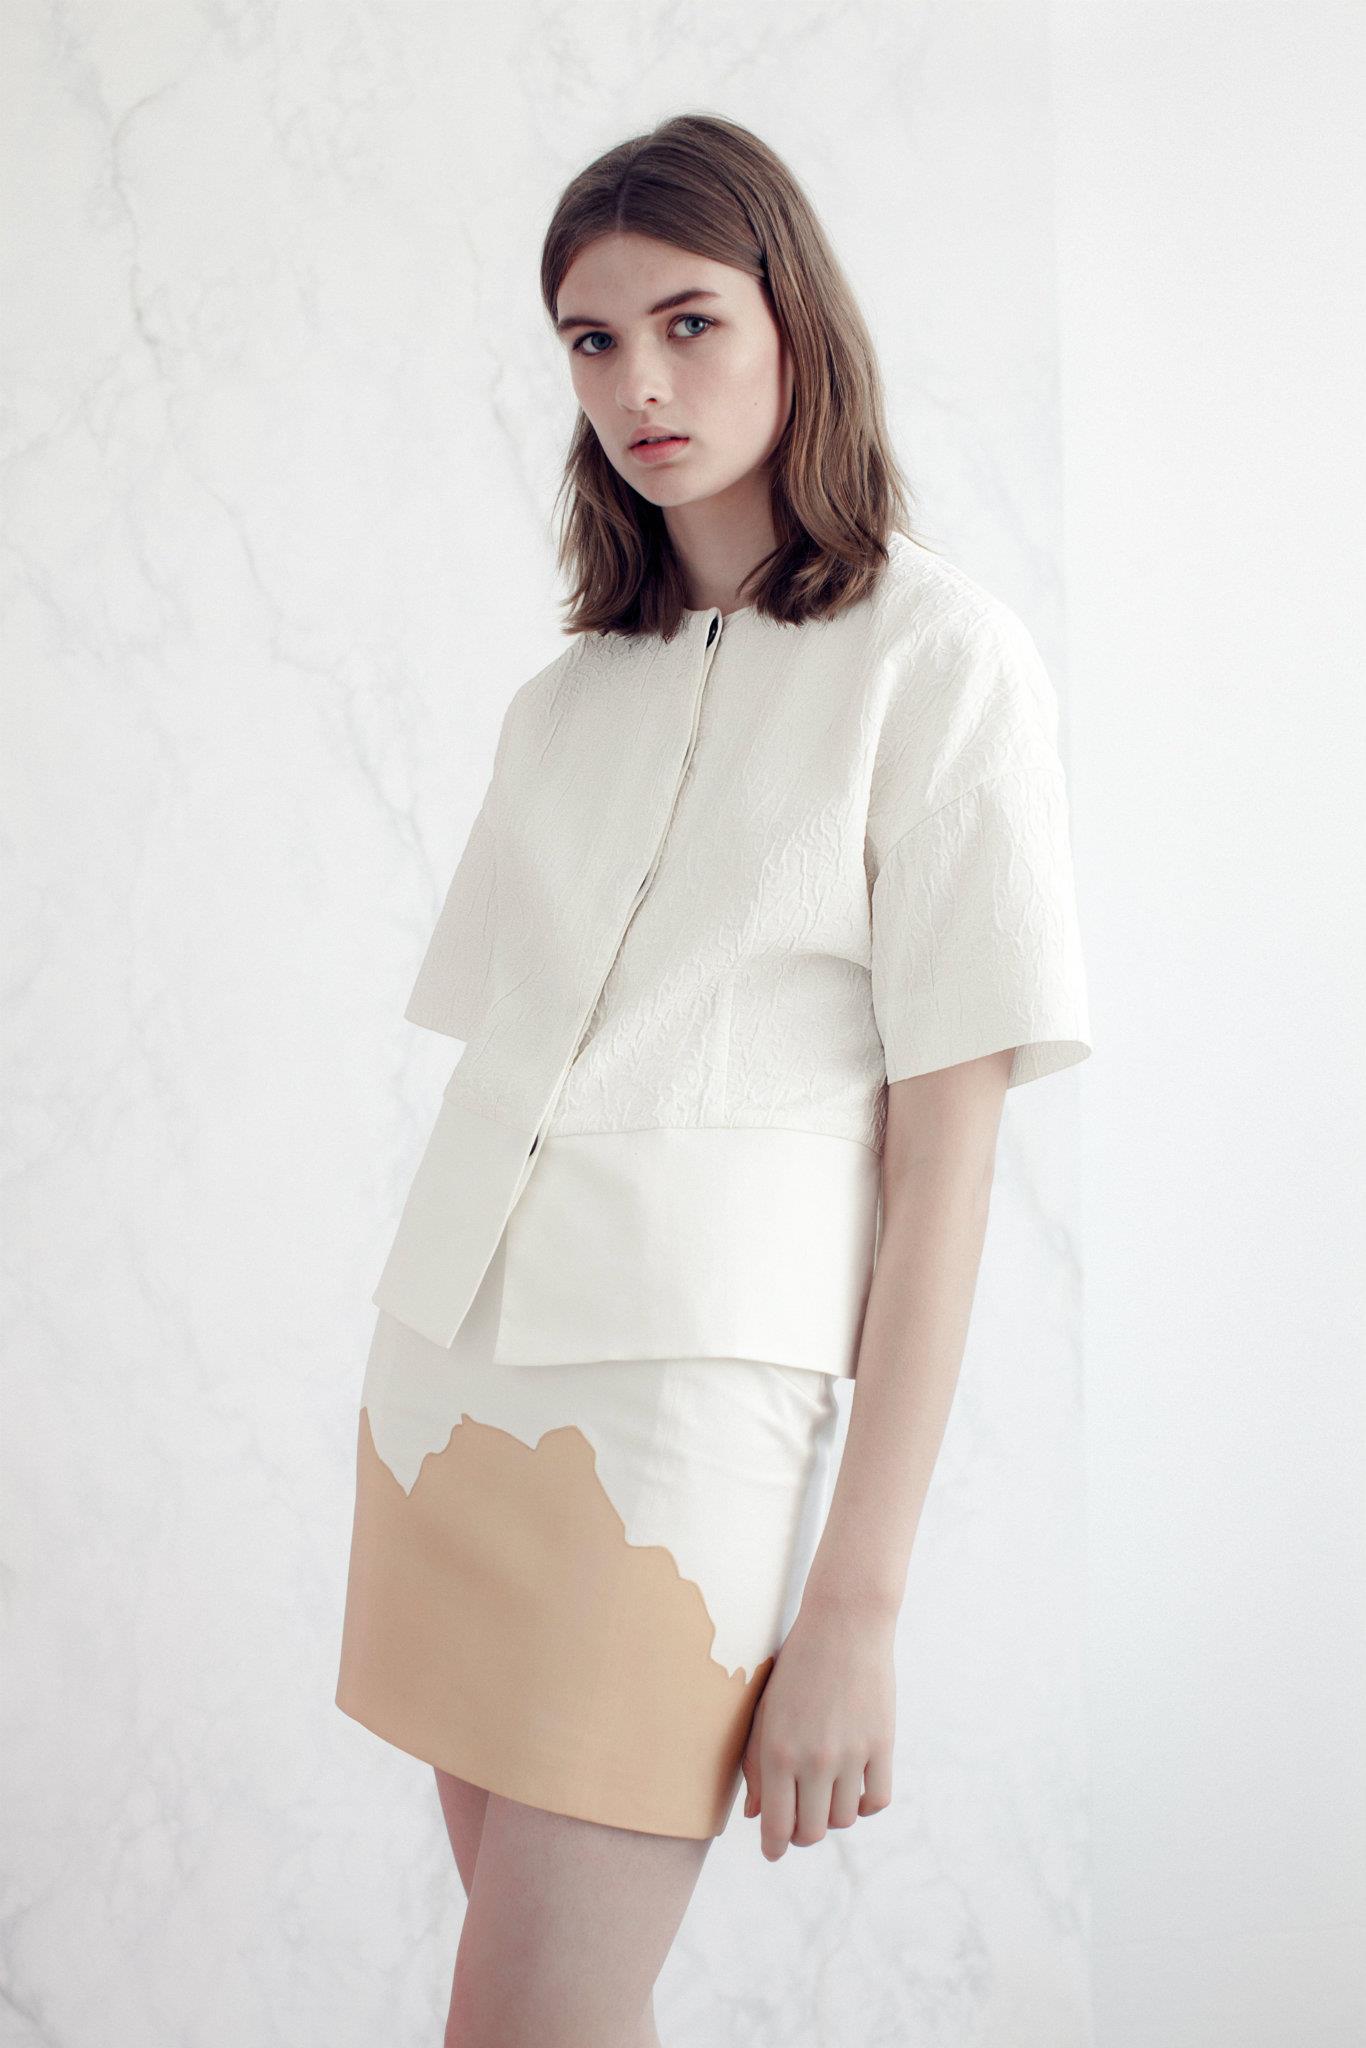 Vionnet Spring 2013 Collection 8